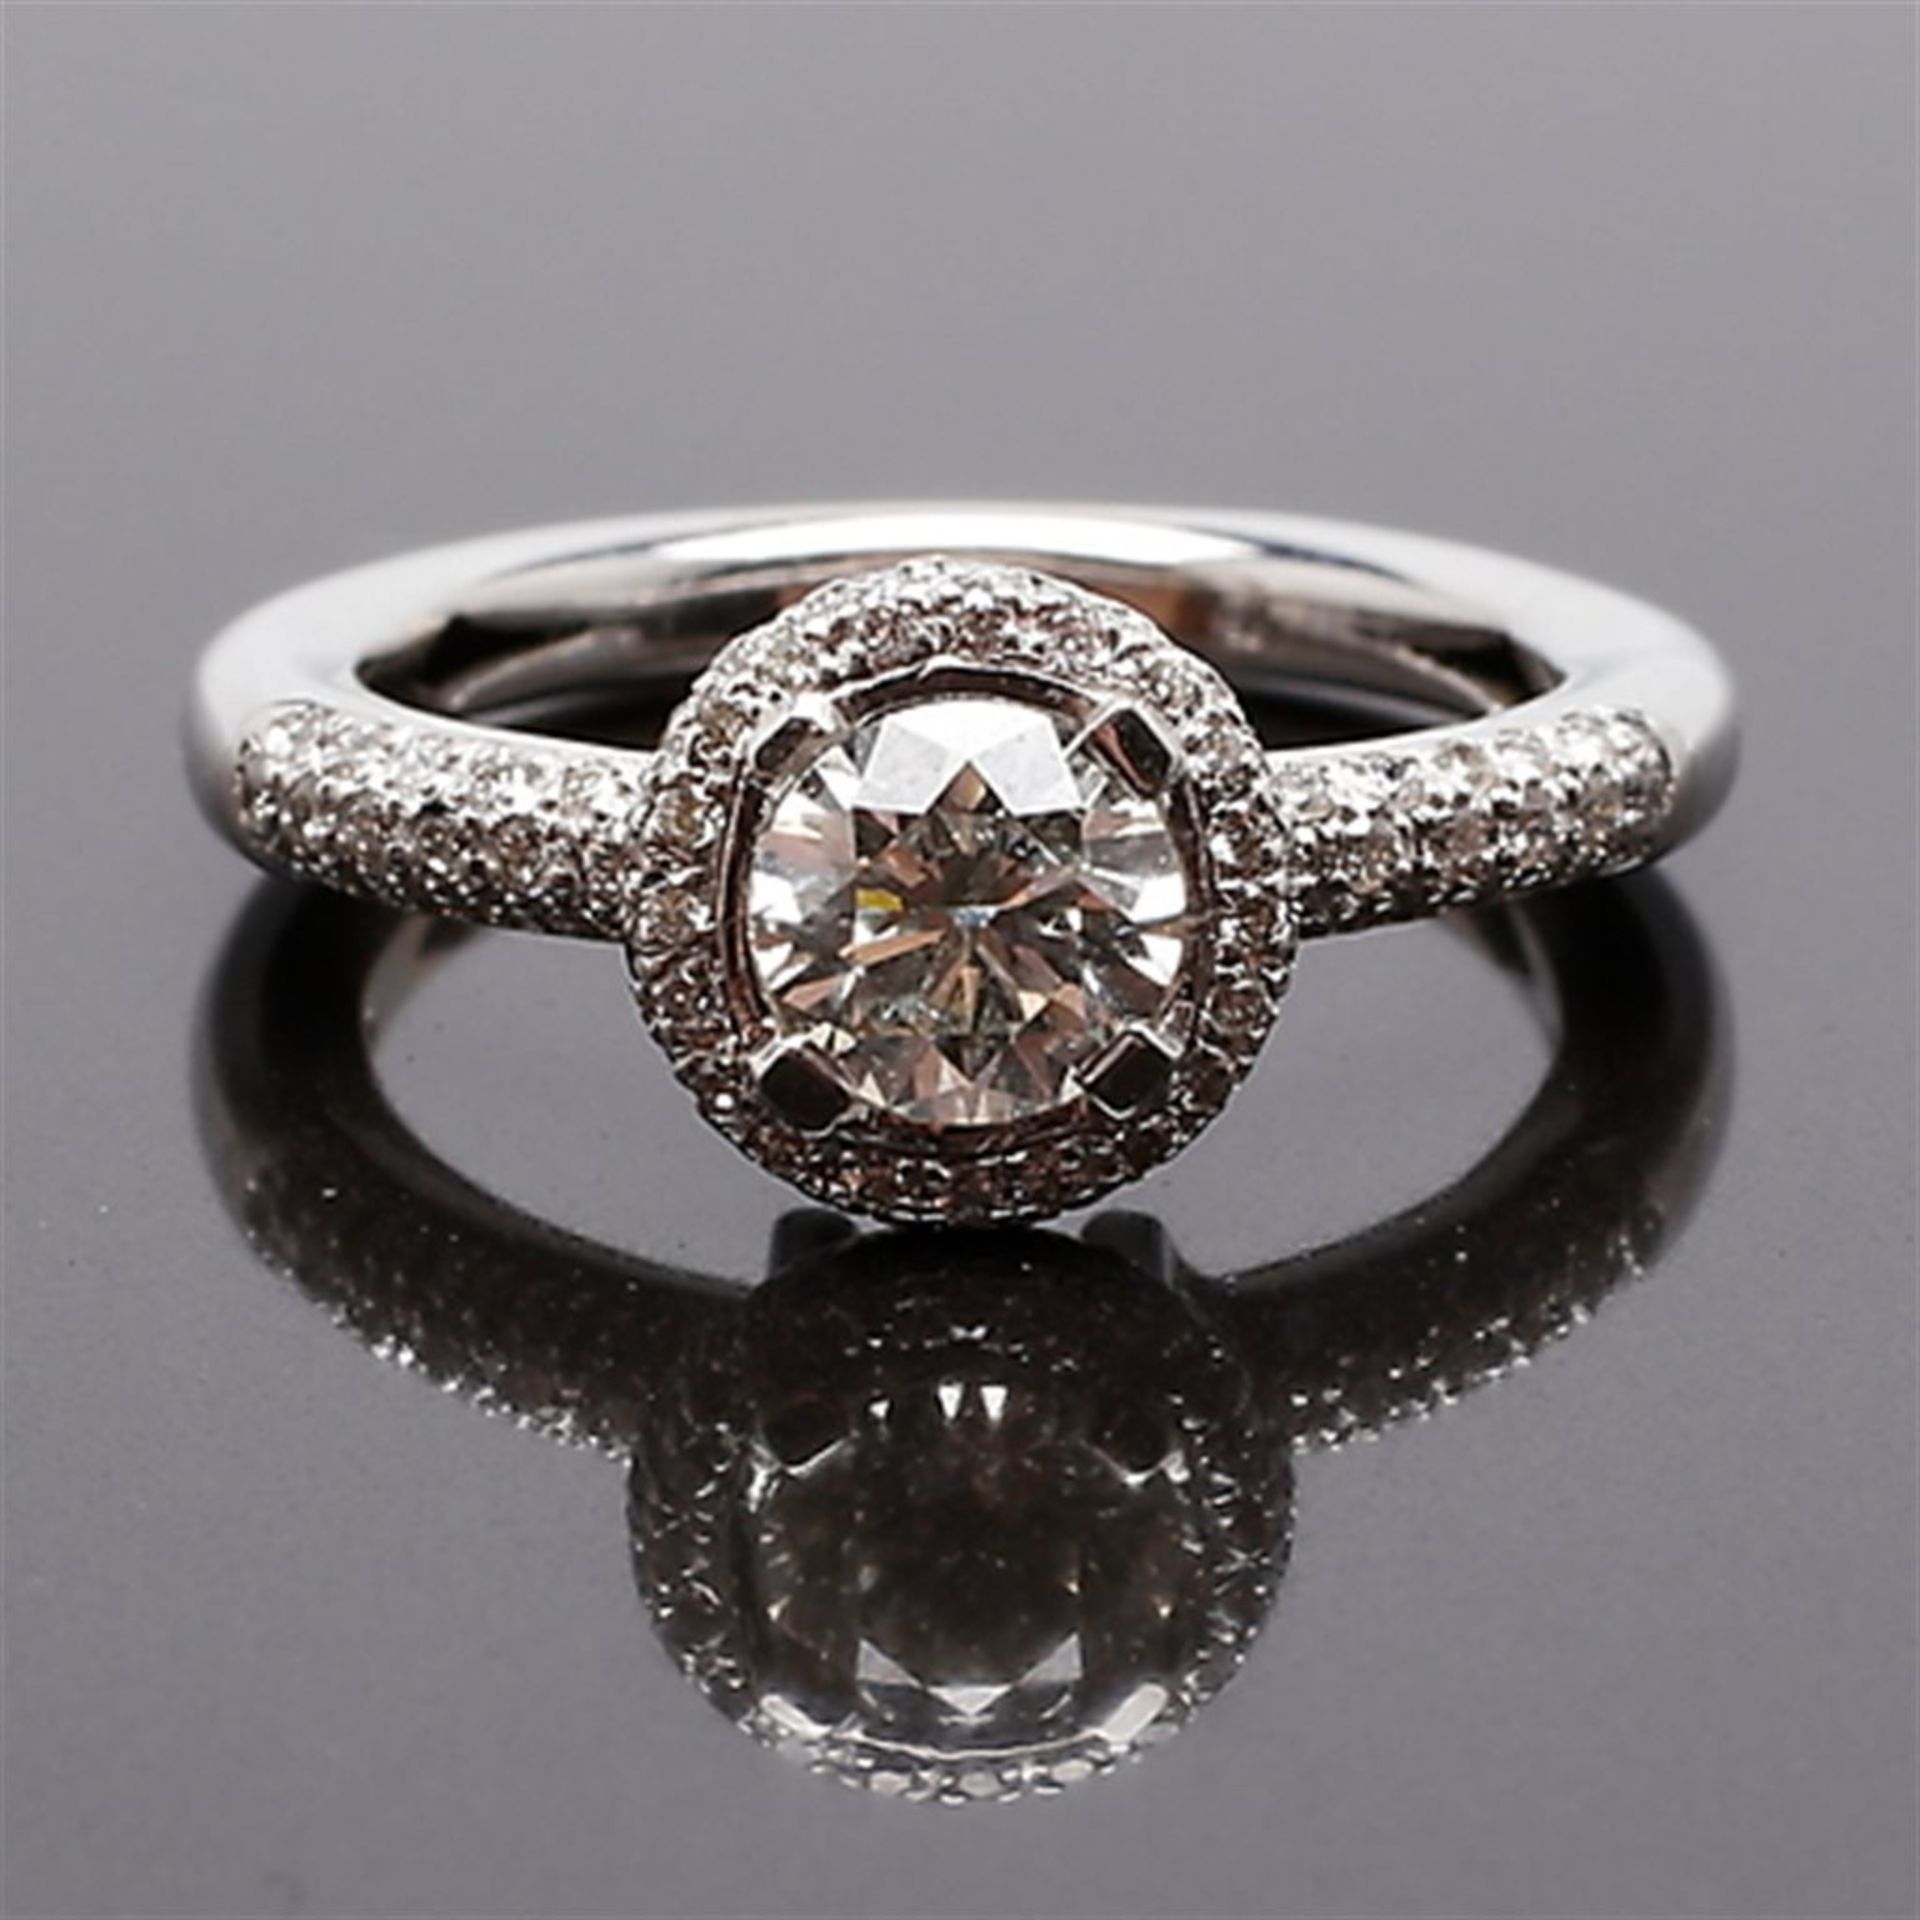 White gold Ring with centre round diamond of 1.21 ct. IGL certificate included